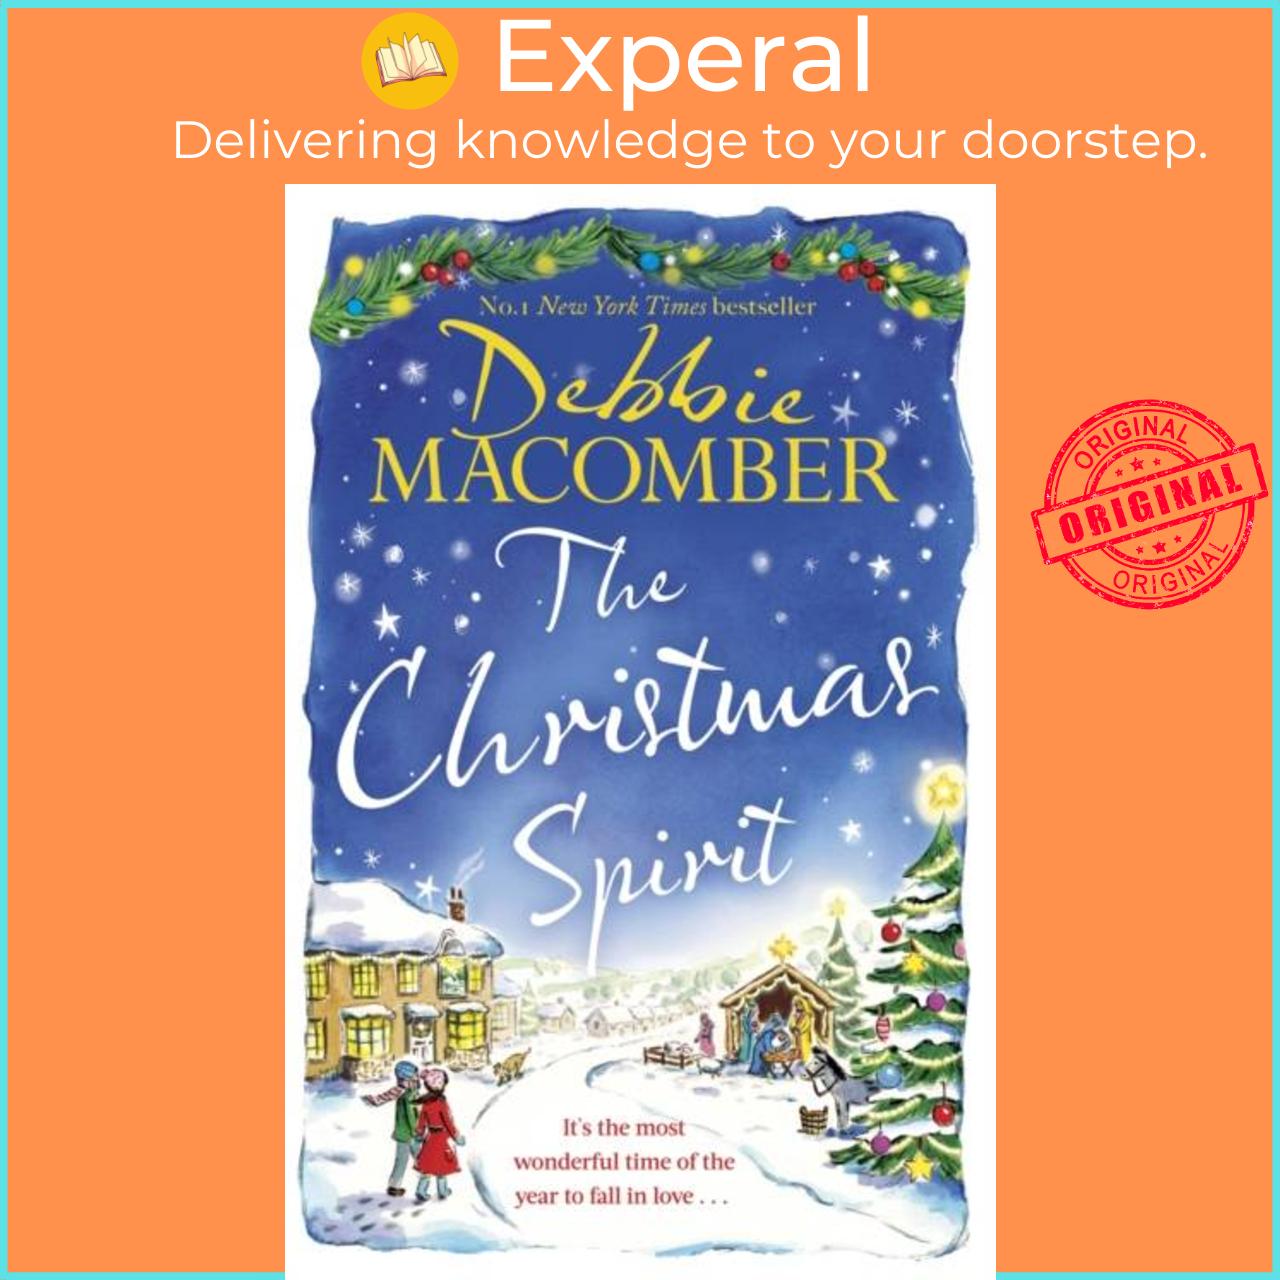 Sách - The Christmas Spirit - the most heart-warming festive romance to get c by Debbie Macomber (UK edition, paperback)